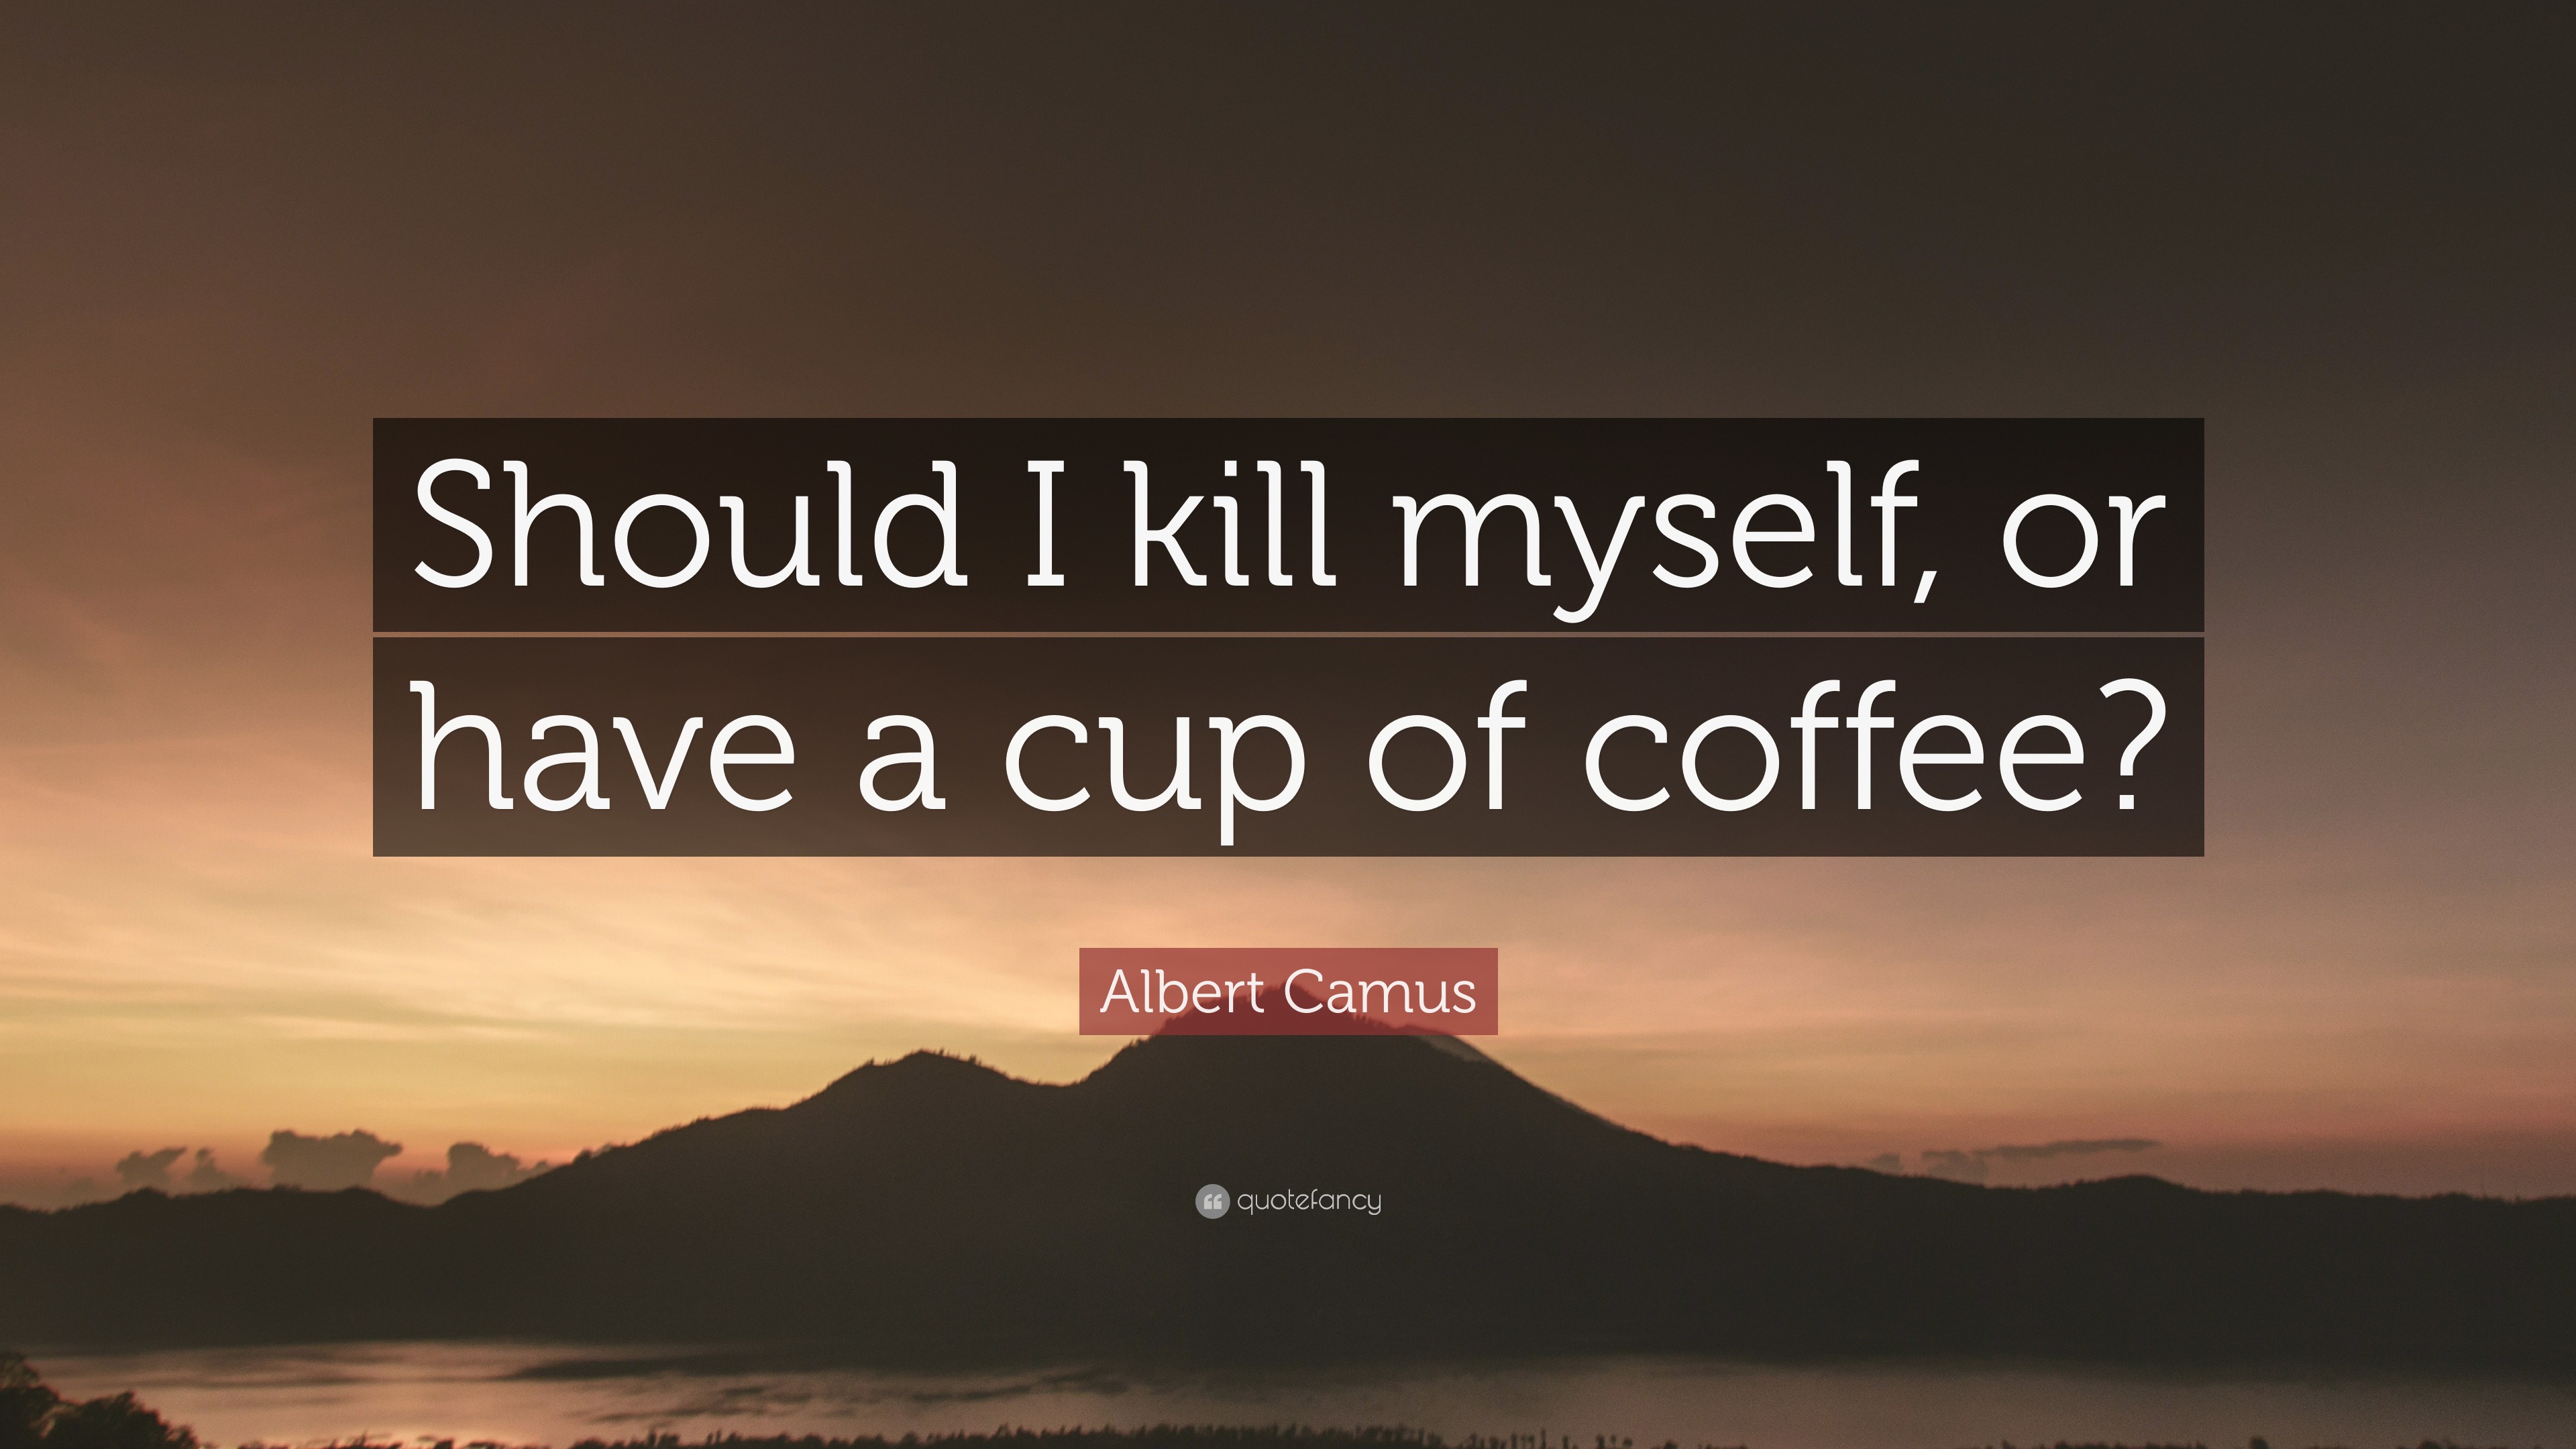 Albert Camus Quote: “Should I kill myself, or have a cup of coffee?”